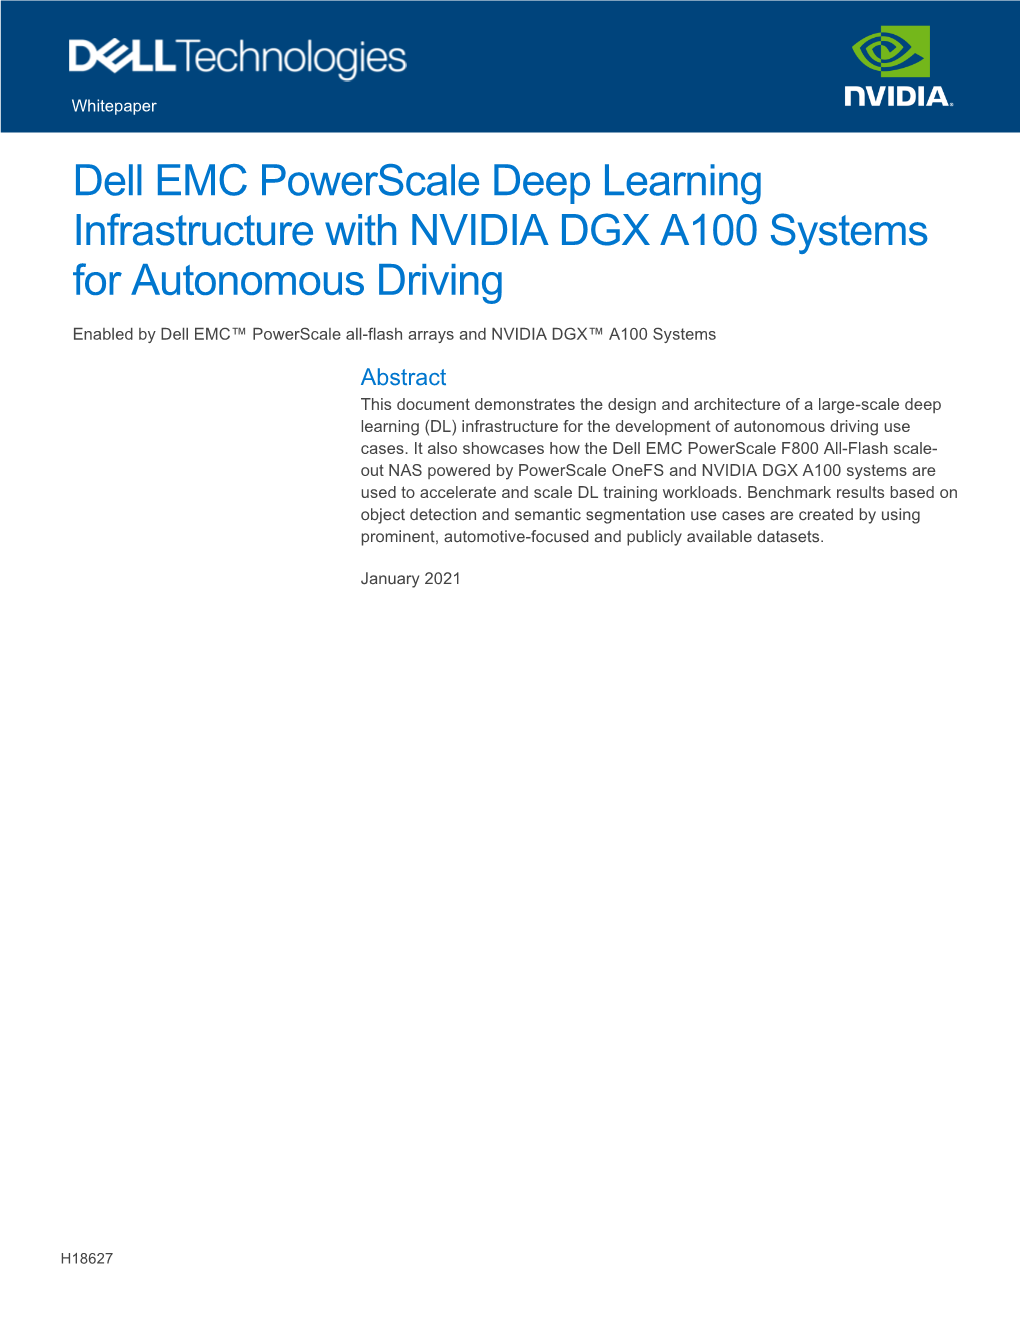 Dell EMC Powerscale Deep Learning Infrastructure with NVIDIA DGX A100 Systems for Autonomous Driving